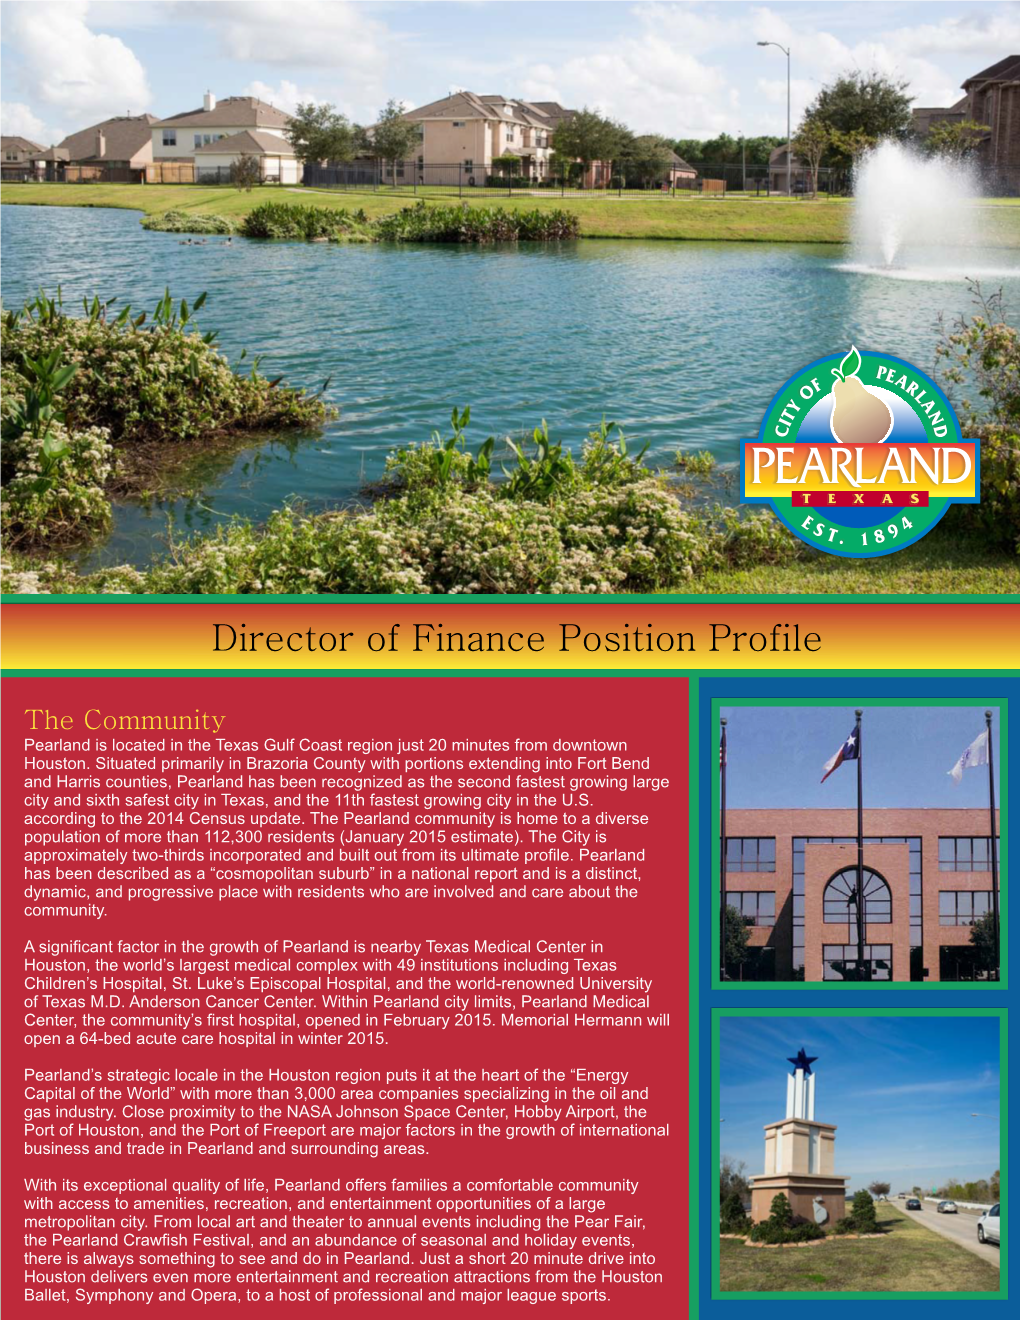 Pearland Director of Finance